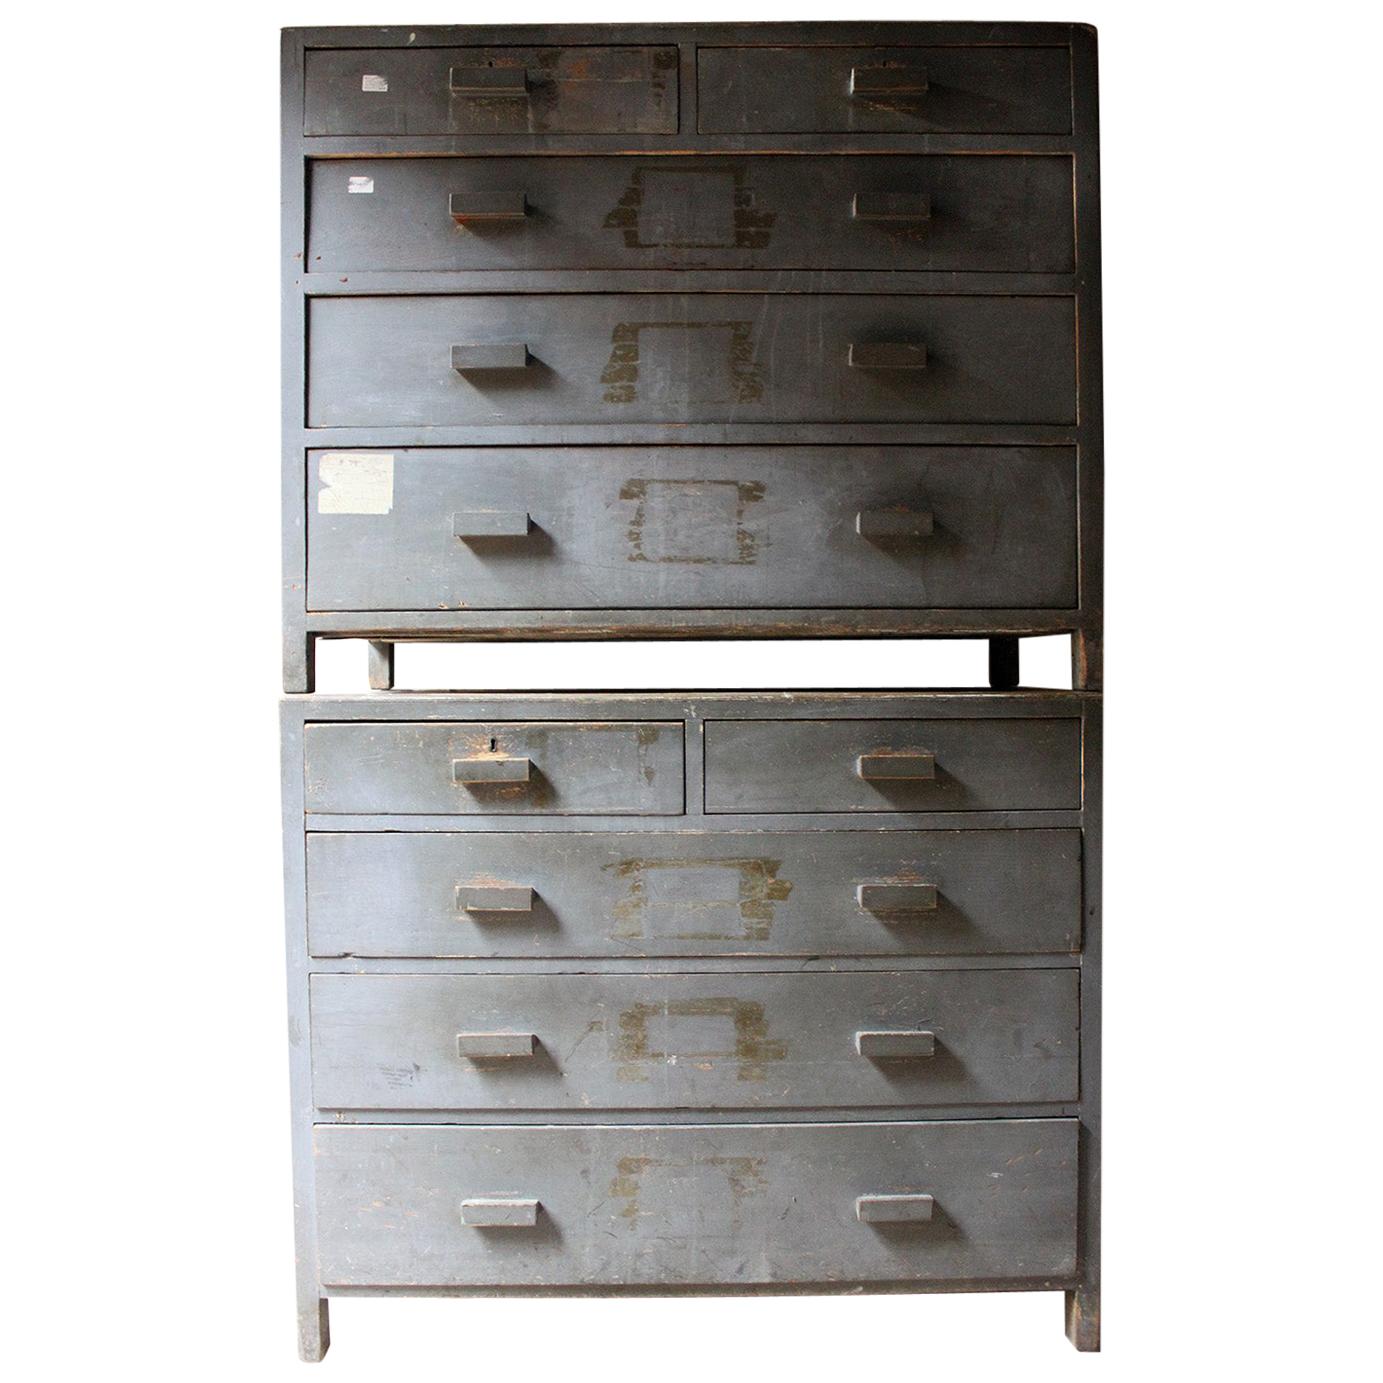 Pair of Painted English Art School Chests of Drawers, circa 1940-1955